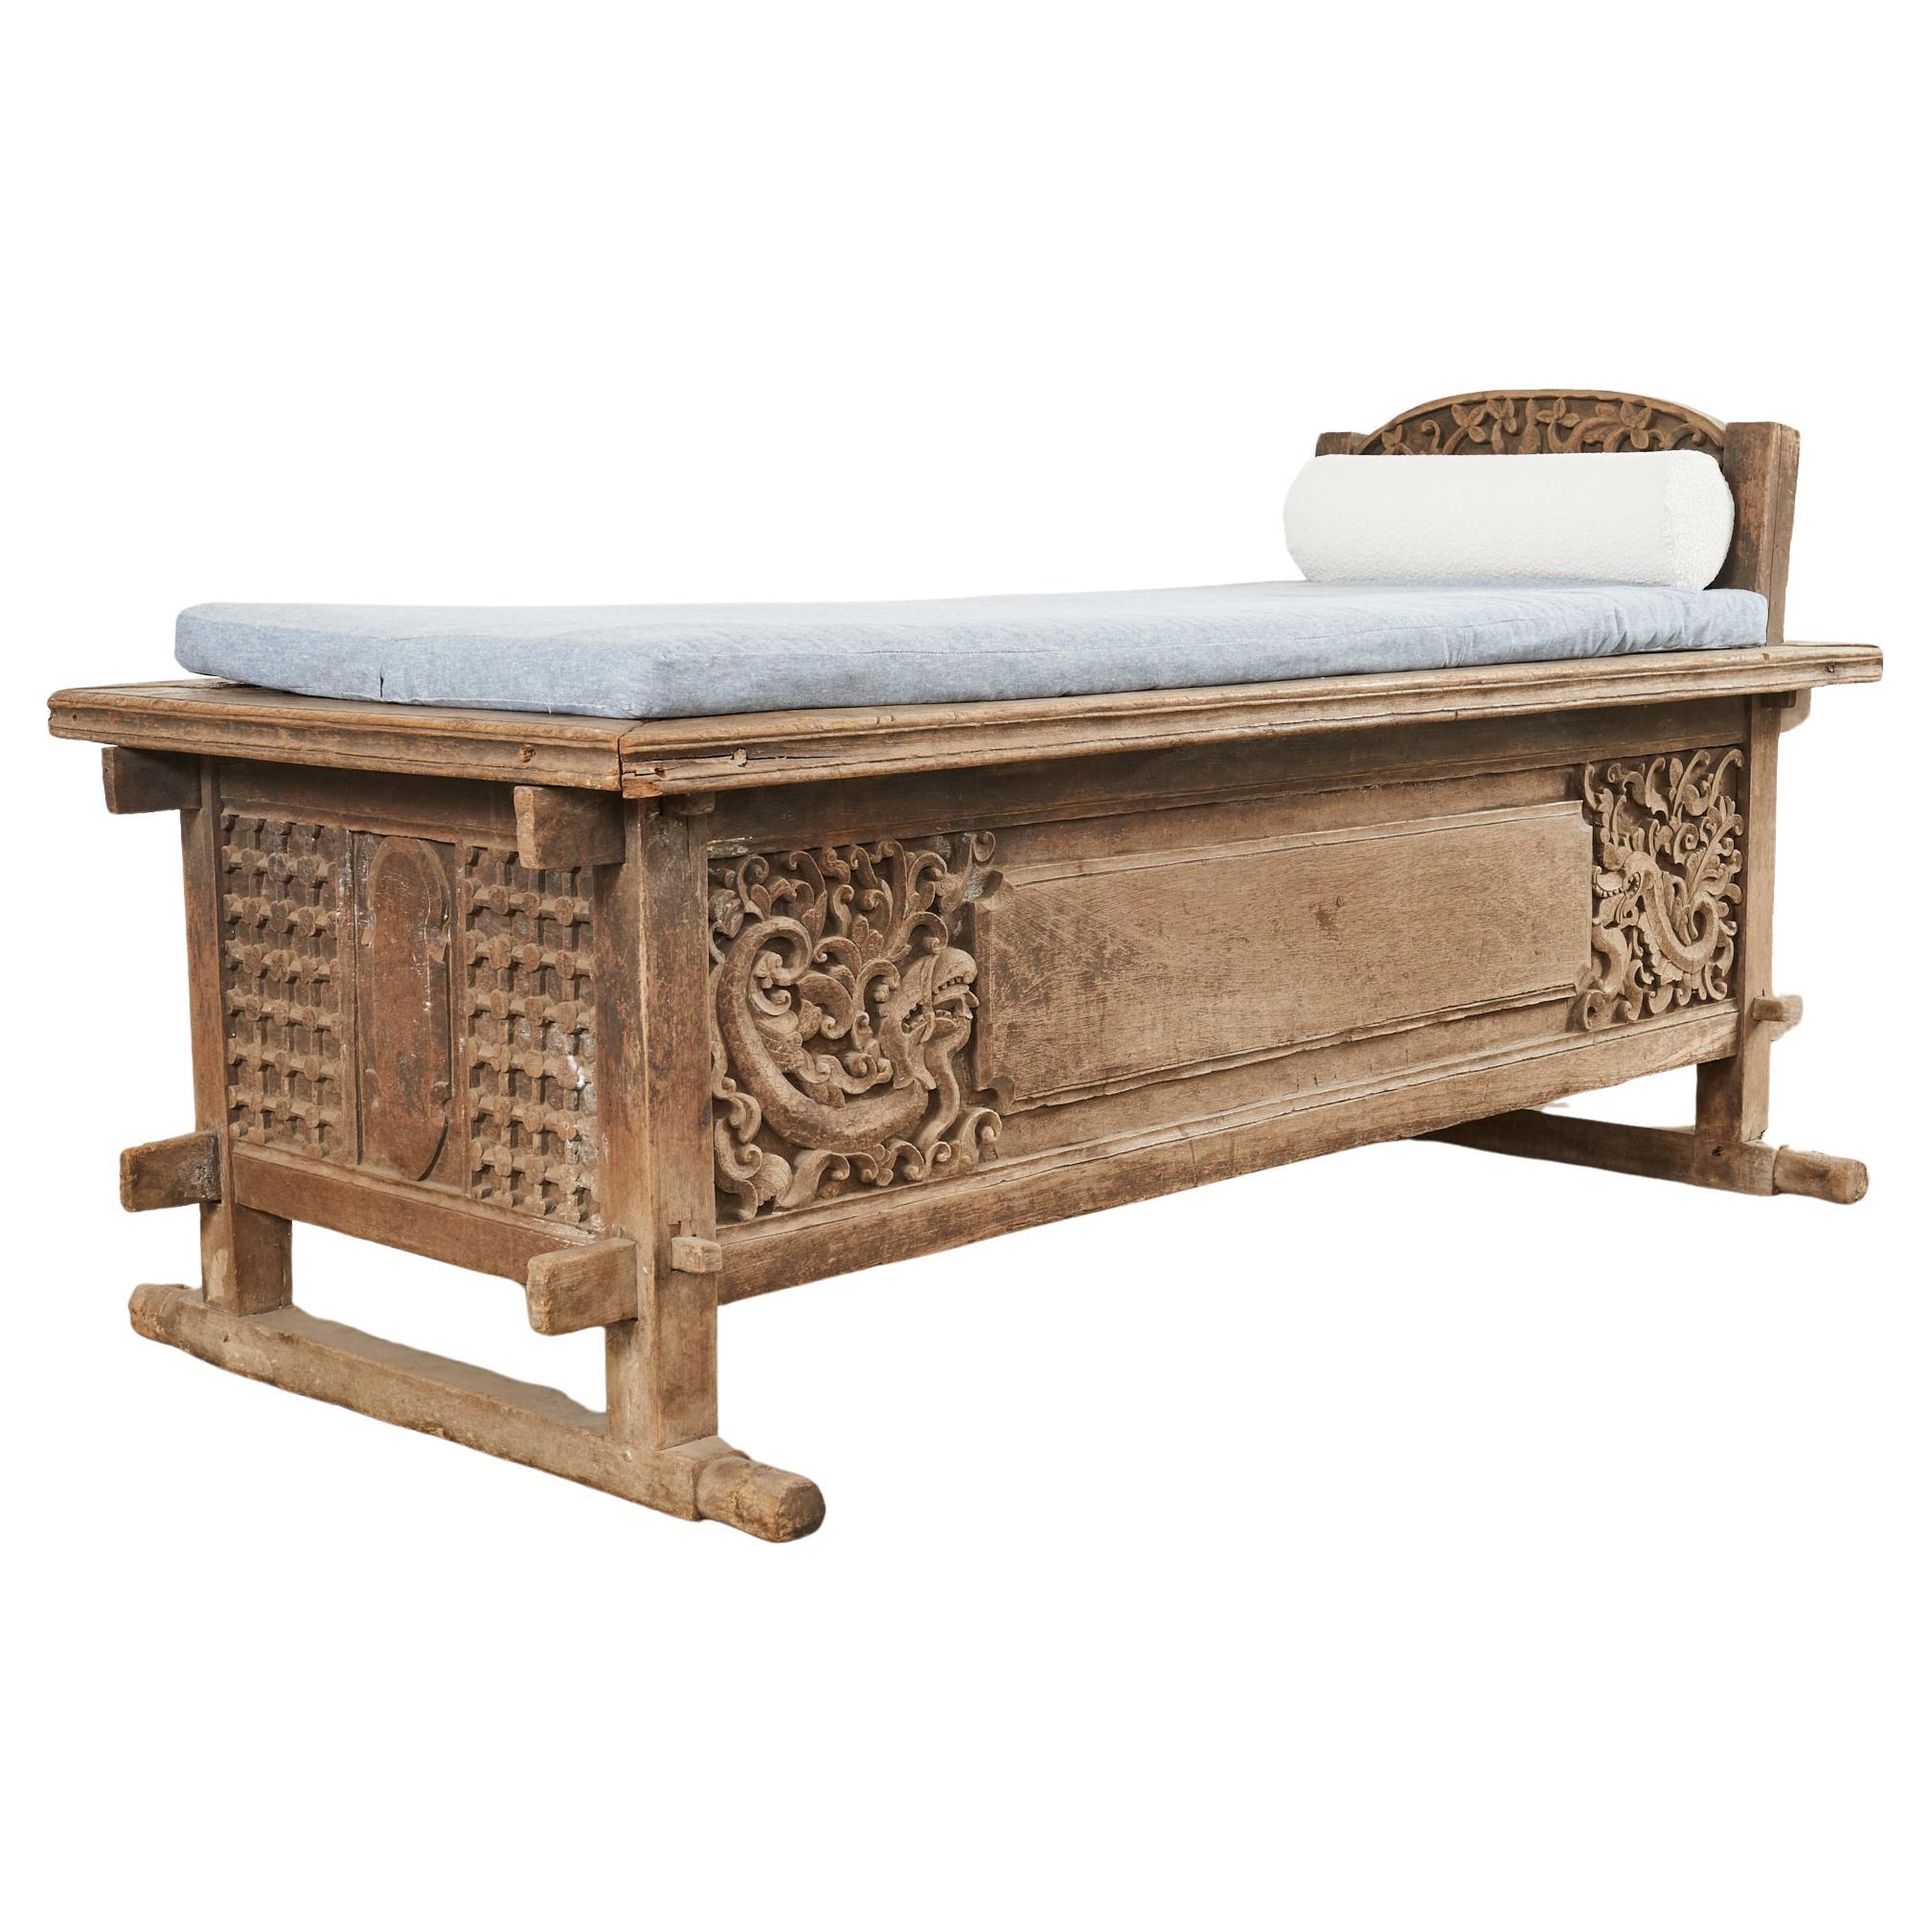 Javanese Carved Teak Indo Wedding Chest Daybed from Bali For Sale